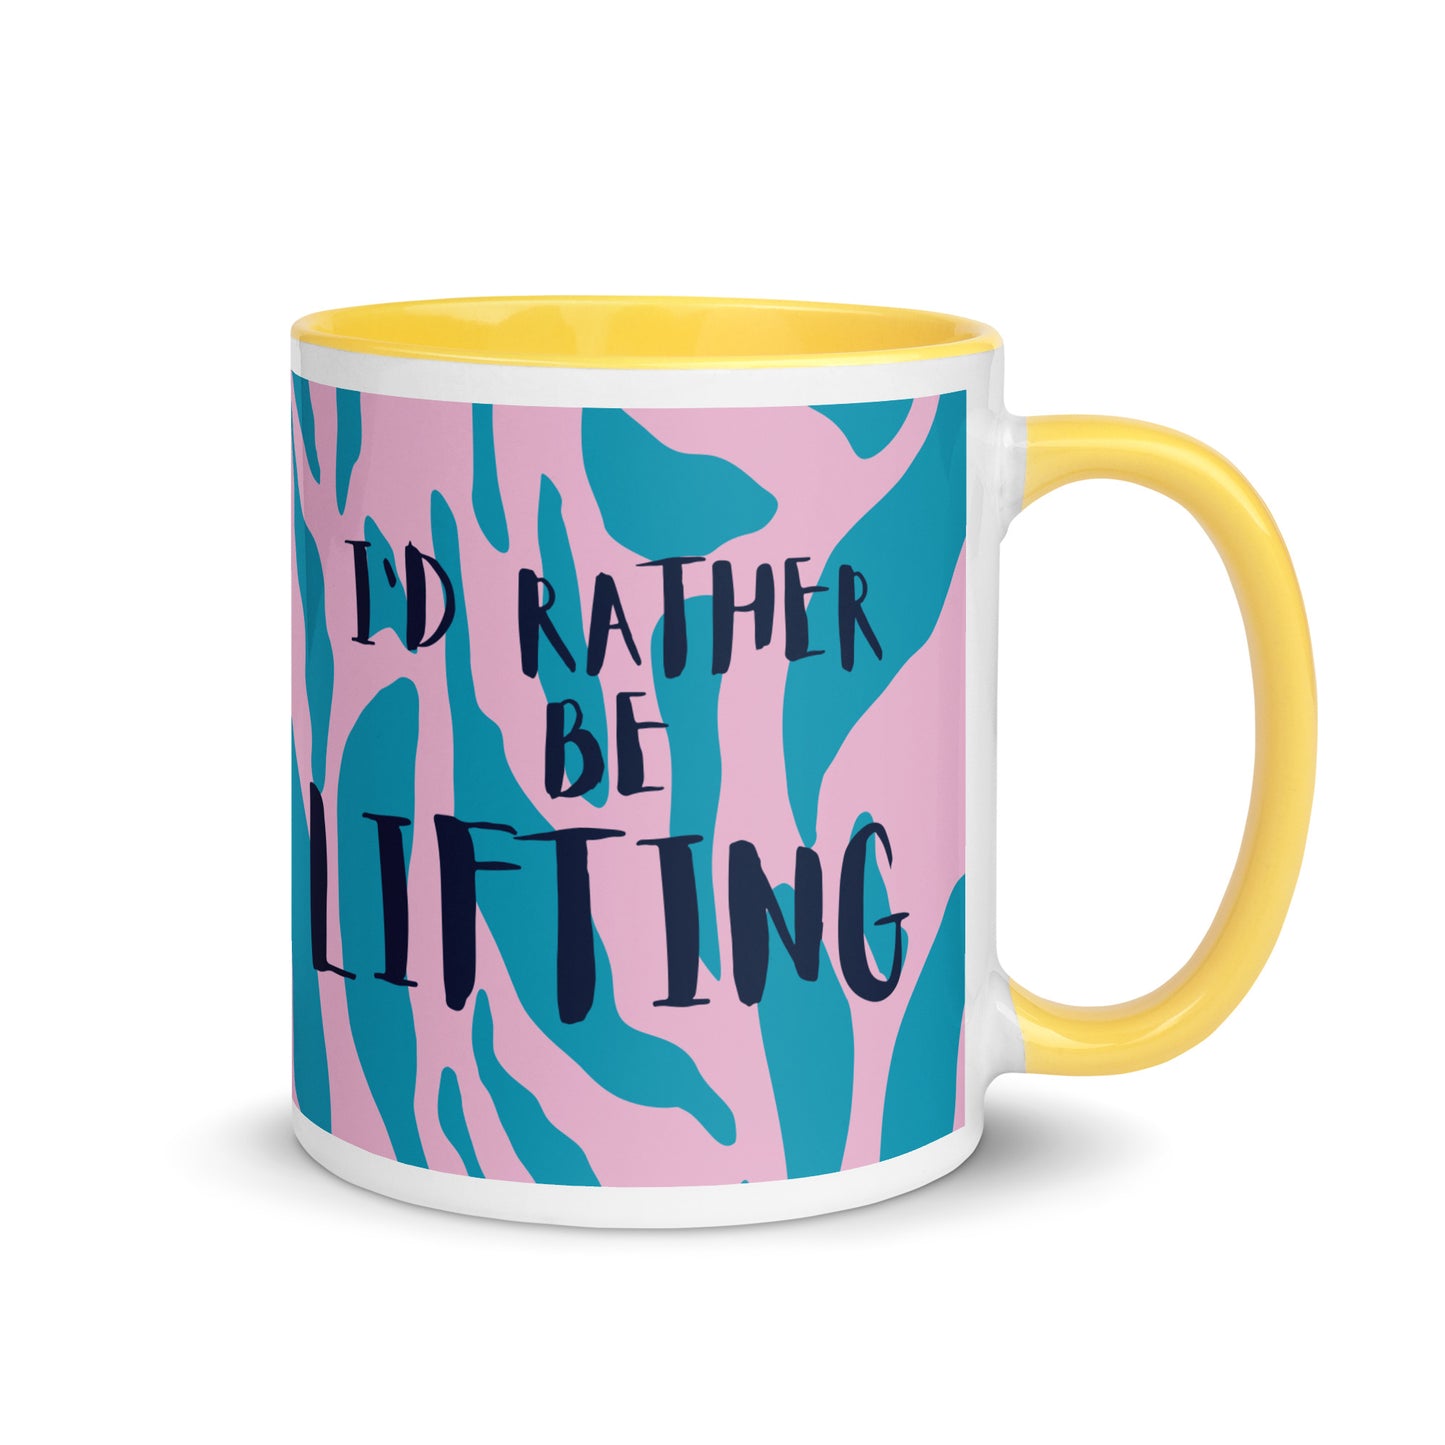 Yellow handled mug with I'd rather be lifting written across a blue and pink animal print background. A gift for people who love the gym